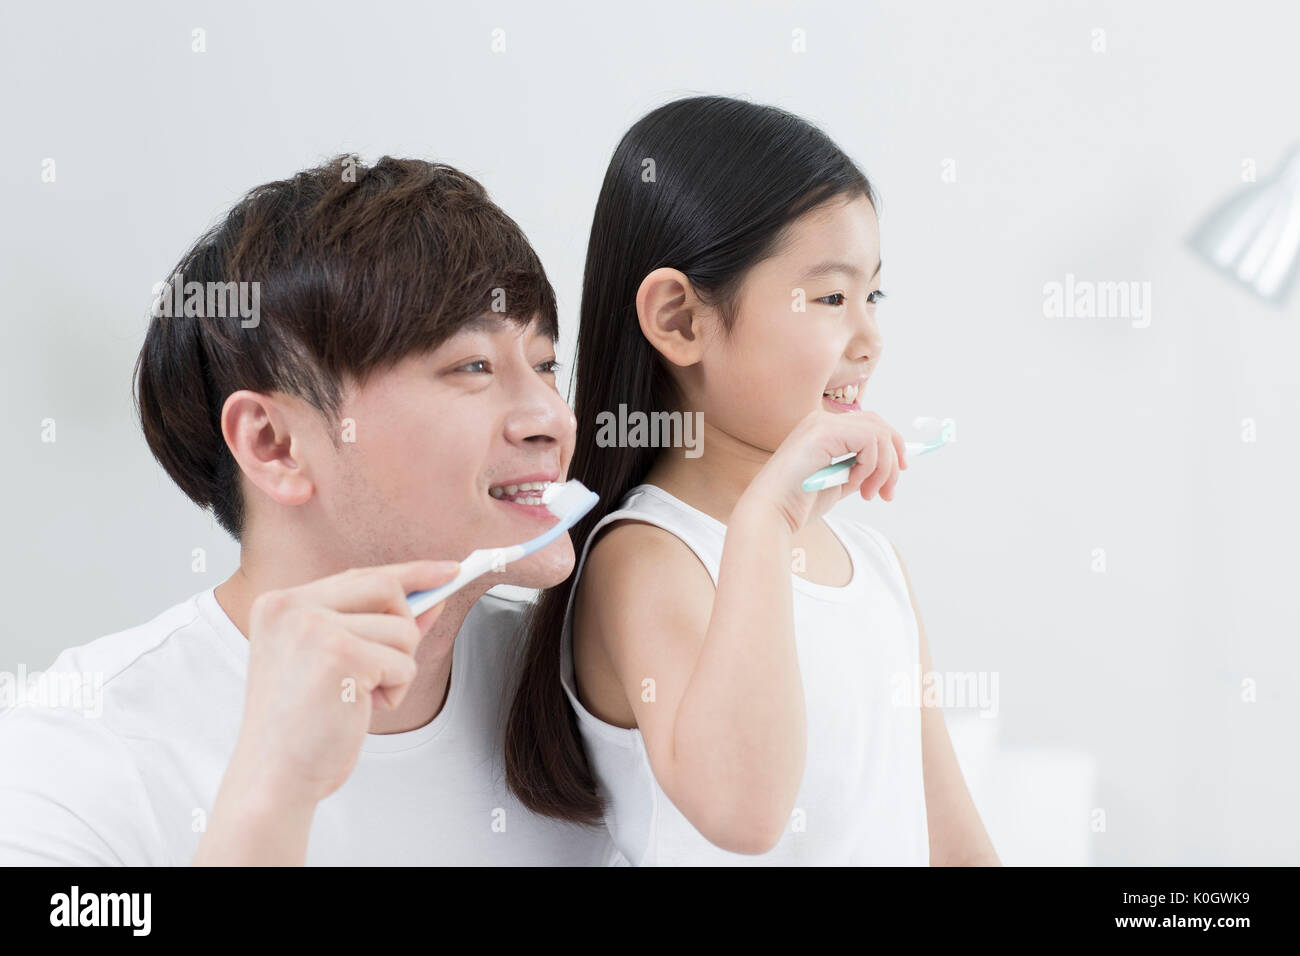 Side view portrait of smiling father and girl brushing teeth together Stock Photo